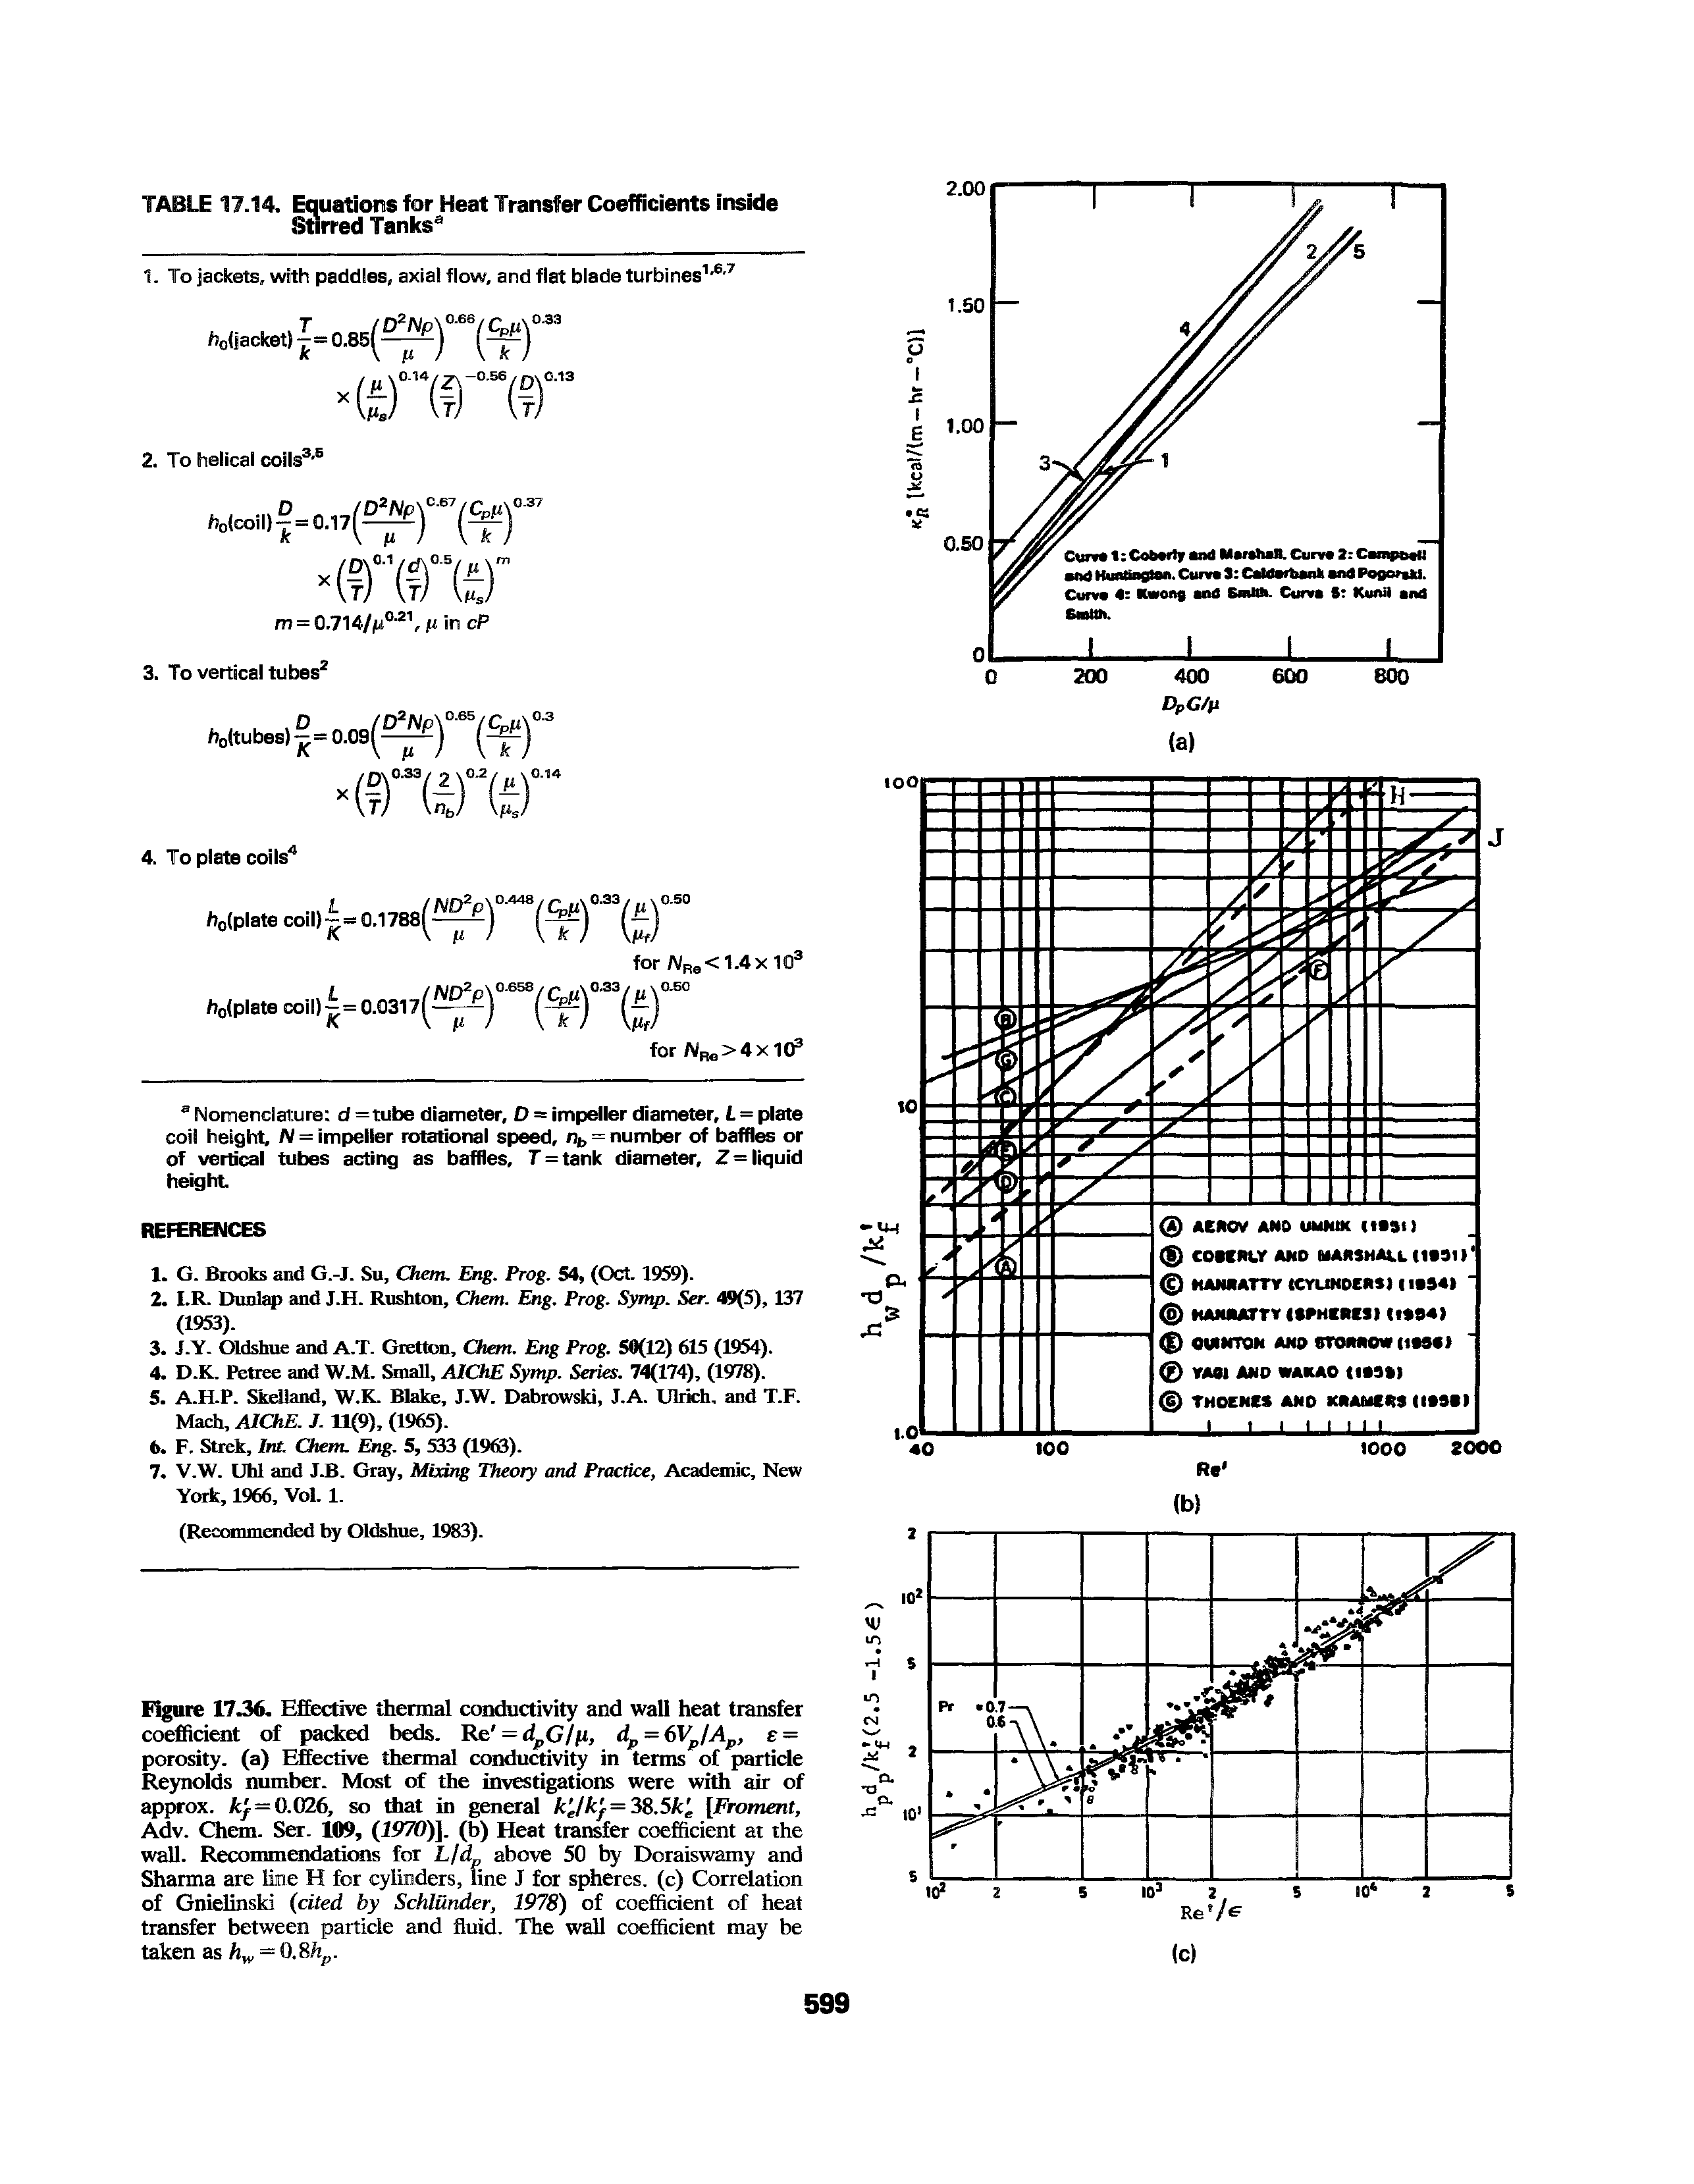 Figure 1736. Effective thermal conductivity and wall heat transfer coefficient of packed beds. Re = dpG/fi, dp = 6Vp/Ap, s -porosity, (a) Effective thermal conductivity in terms of particle Reynolds number. Most of the investigations were with air of approx. kf = 0.026, so that in general k elk f = 38.5k [Froment, Adv. Chem. Ser. 109, (1970)]. (b) Heat transfer coefficient at the wall. Recommendations for L/dp above 50 by Doraiswamy and Sharma are line H for cylinders, line J for spheres, (c) Correlation of Gnielinski (cited by Schlilnder, 1978) of coefficient of heat transfer between particle and fluid. The wall coefficient may be taken as hw = 0.8hp.